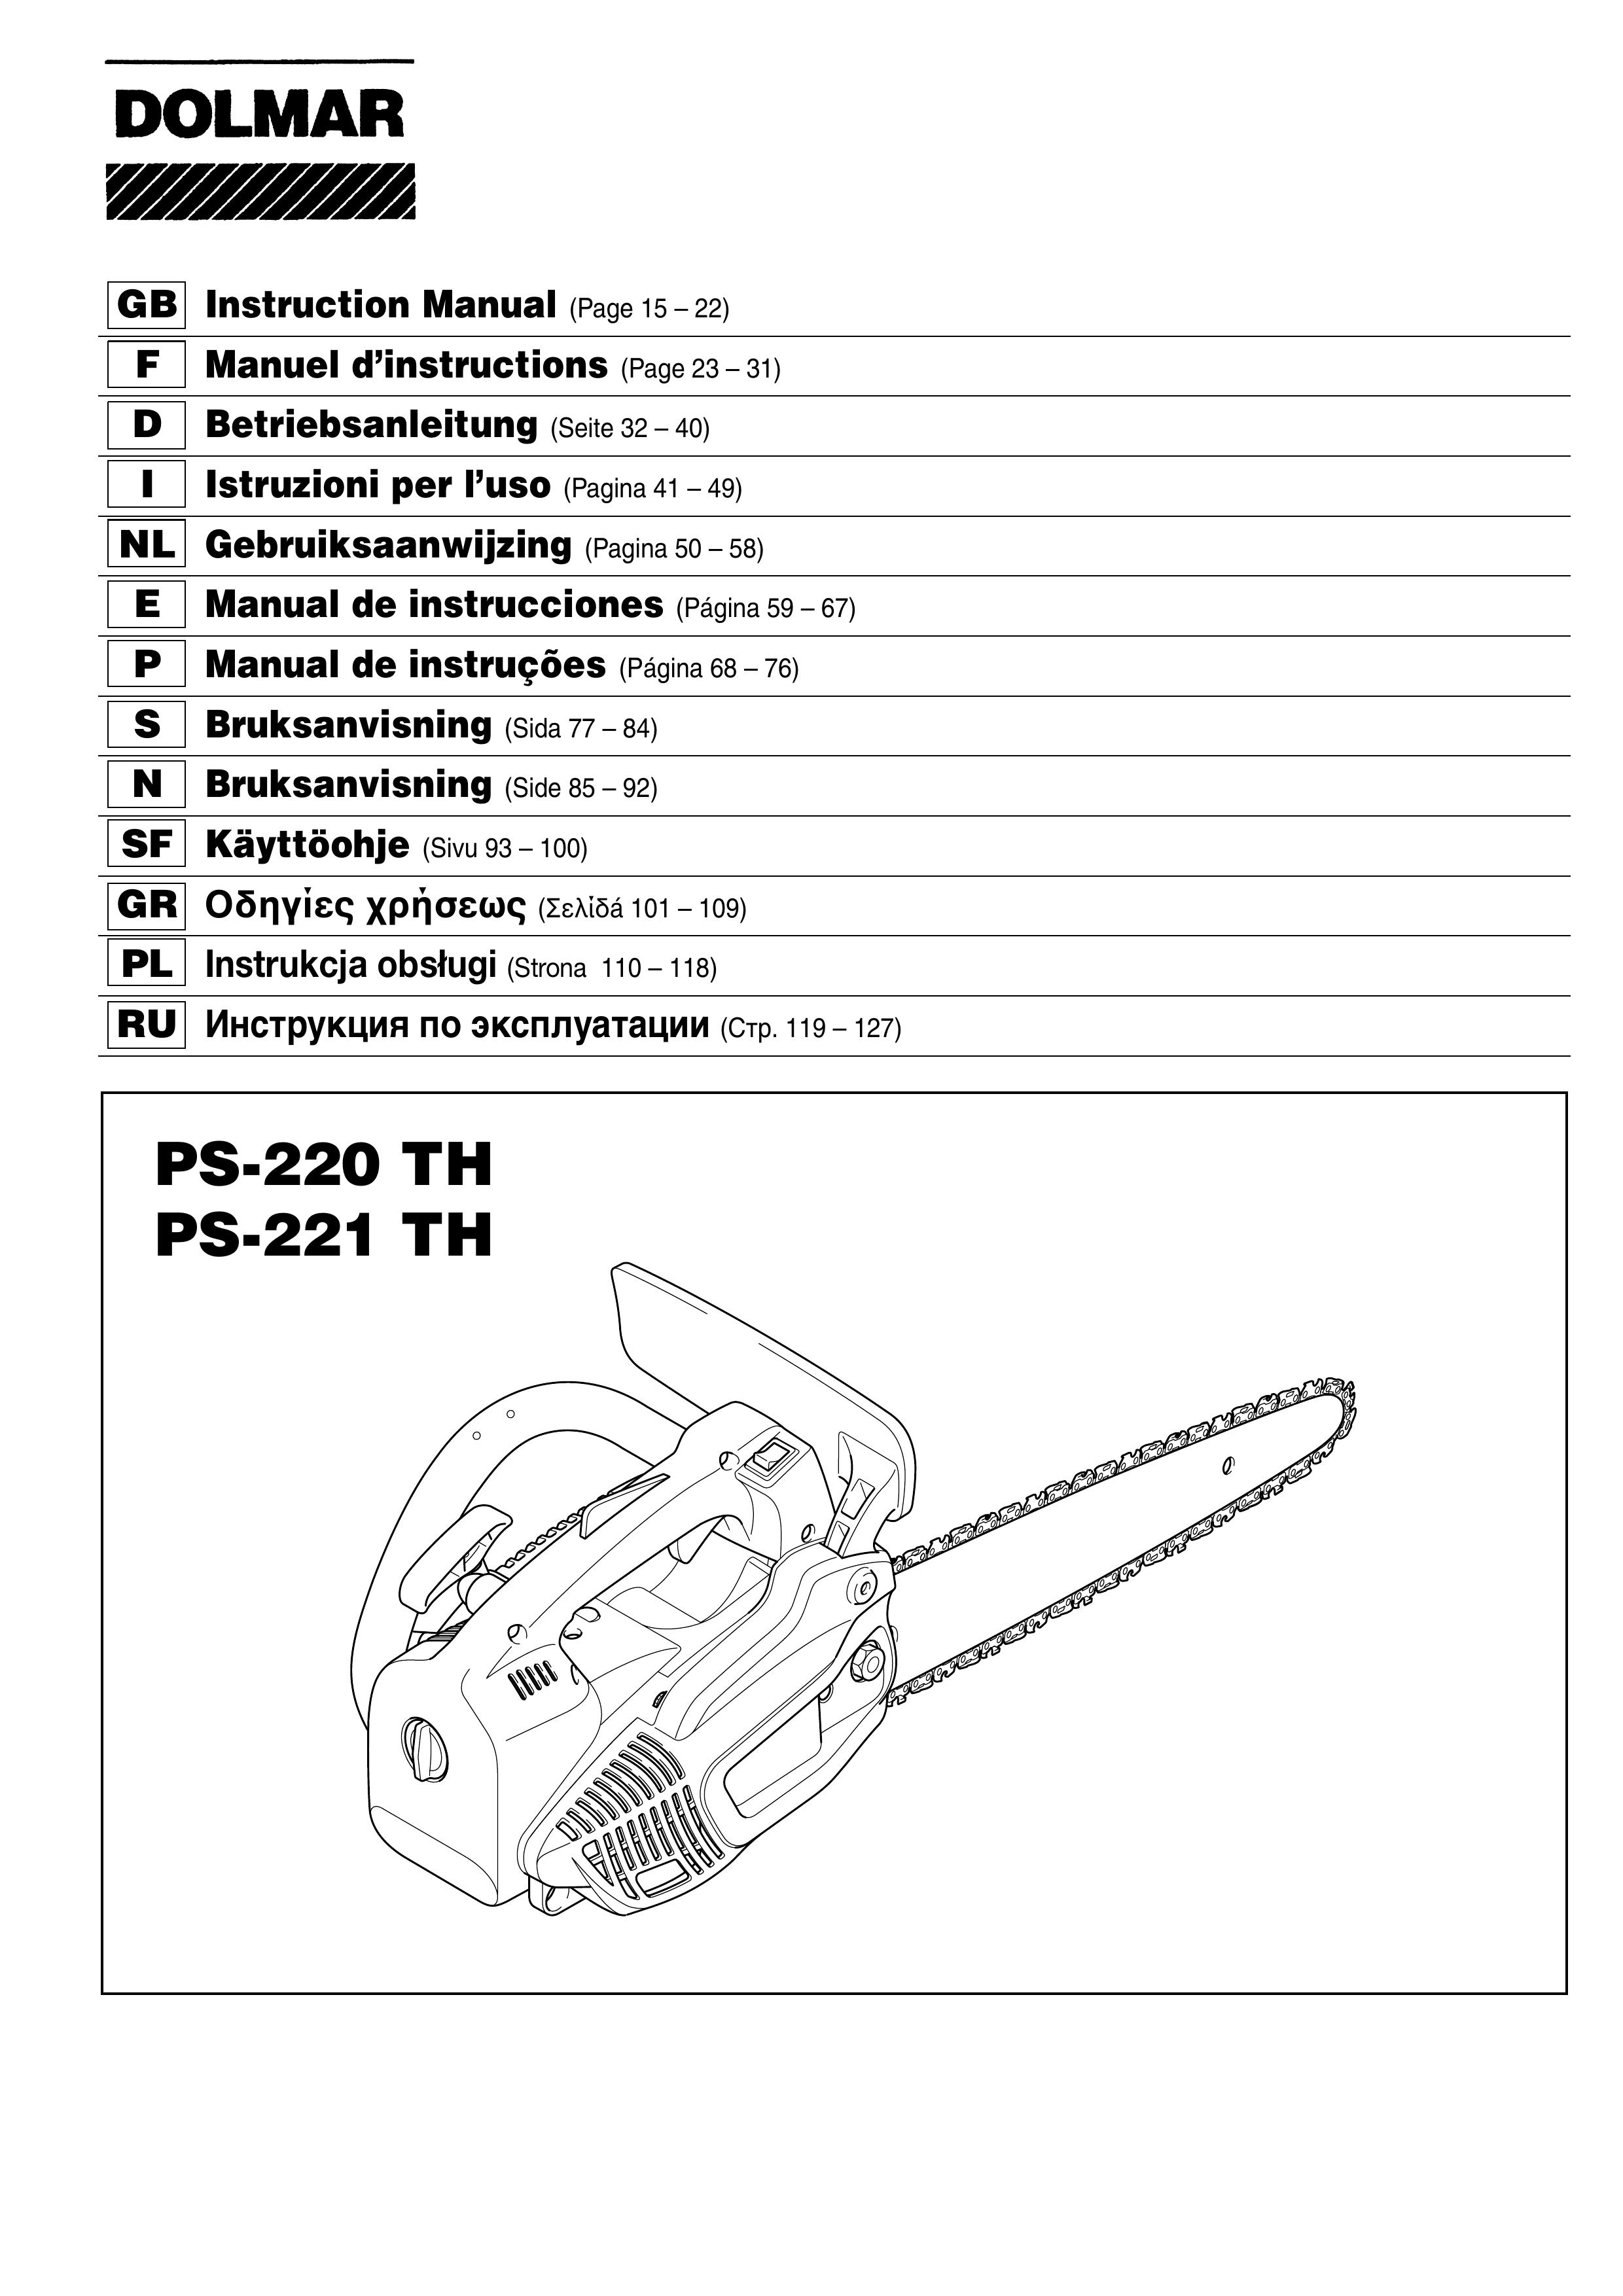 Dolmar PS-220 TH, PS-221 TH Chainsaw User Manual